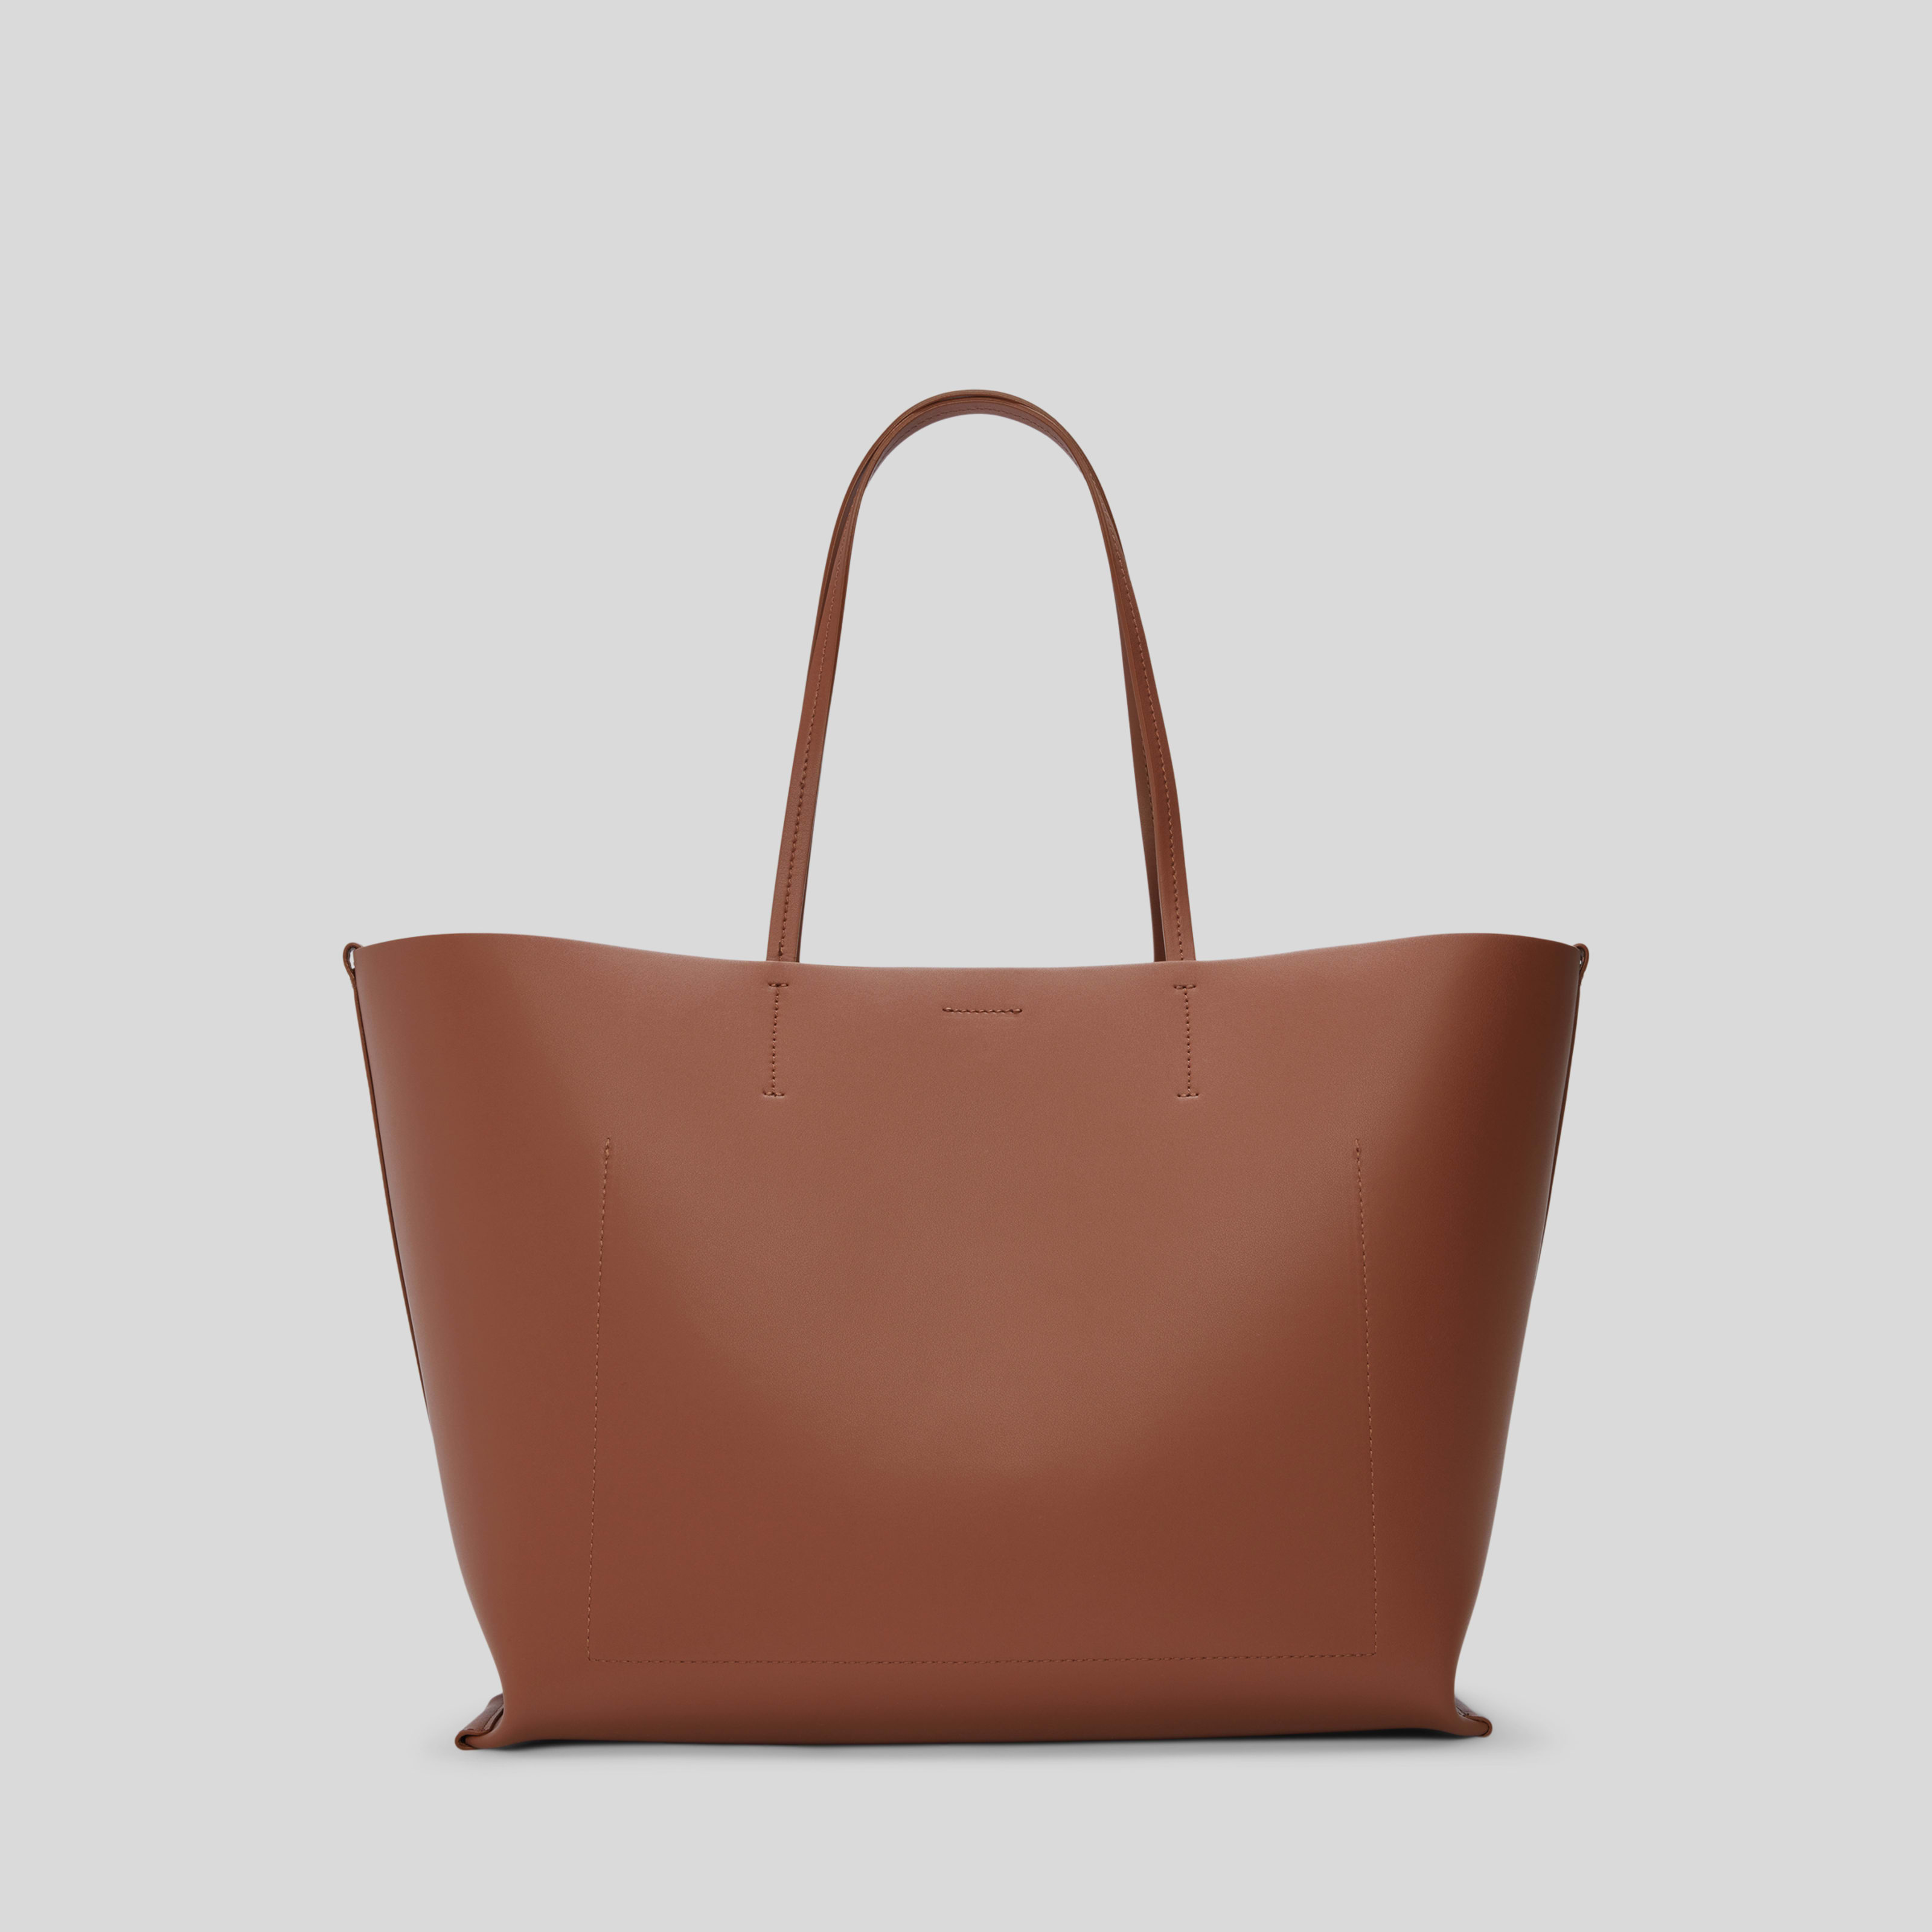 women's luxe italian leather tote bag by everlane in cognac